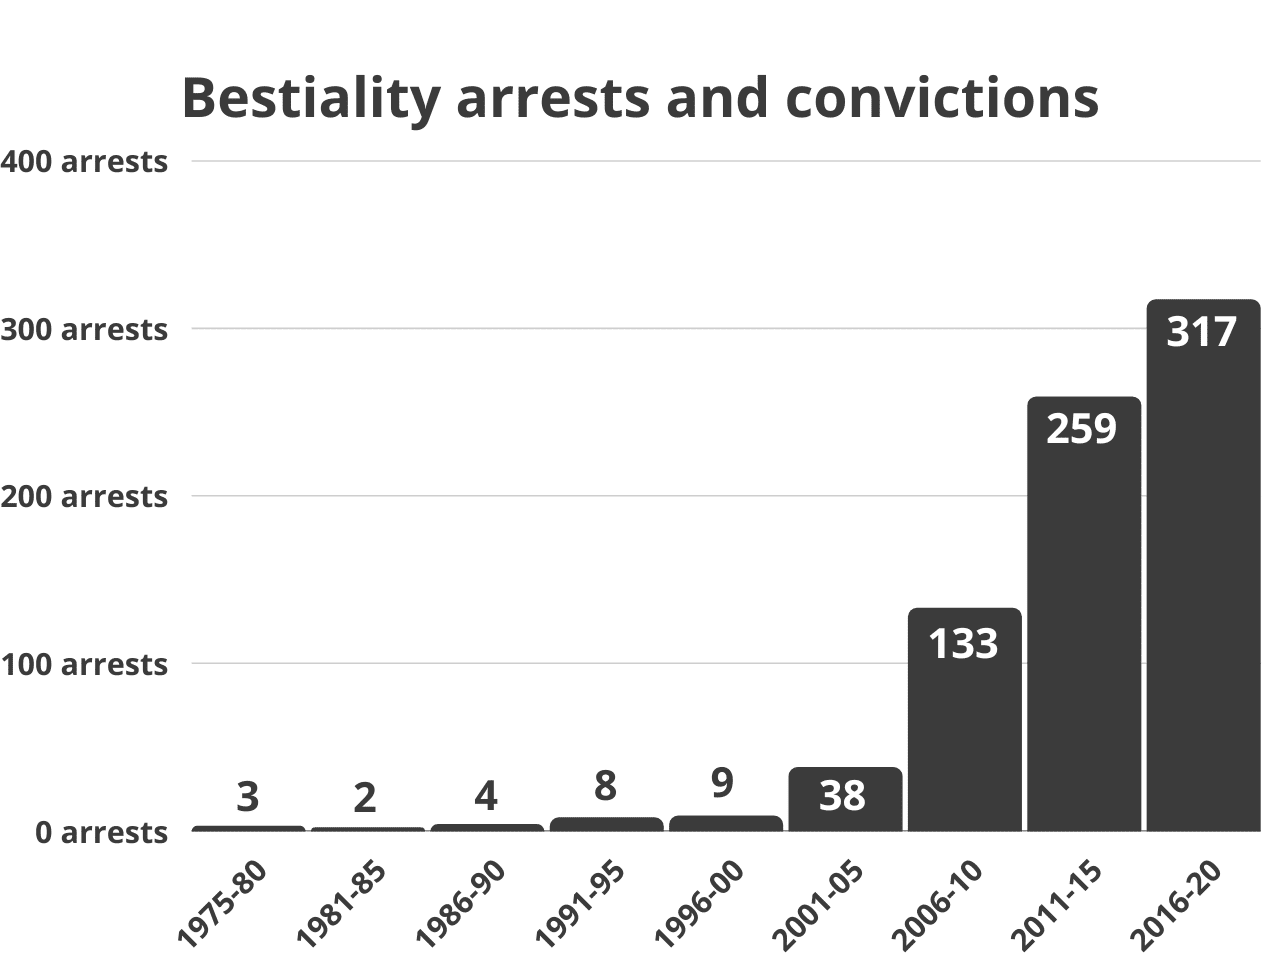 bestiality statistics on the number of arrests per year